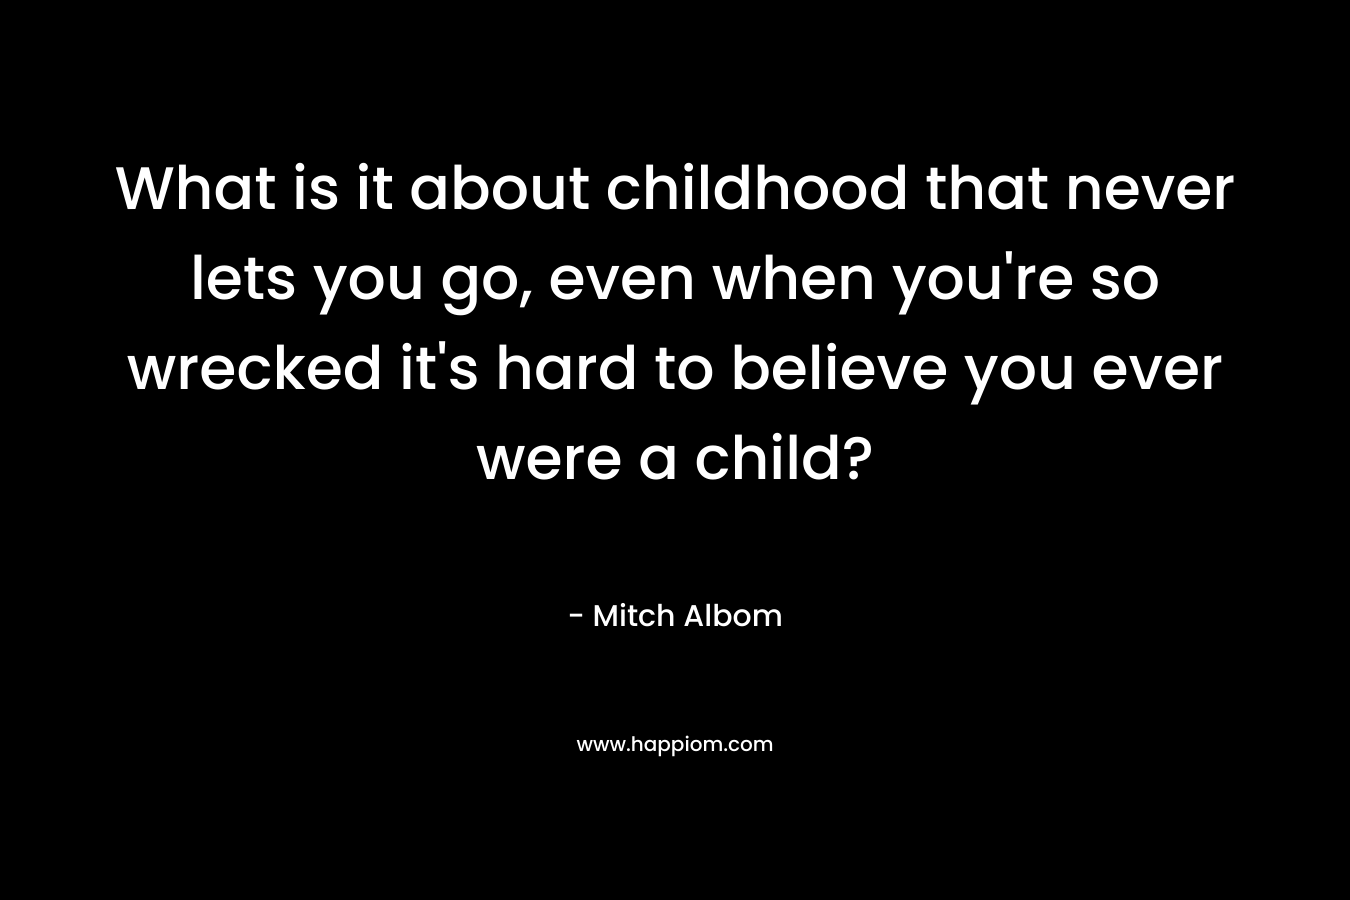 What is it about childhood that never lets you go, even when you’re so wrecked it’s hard to believe you ever were a child? – Mitch Albom